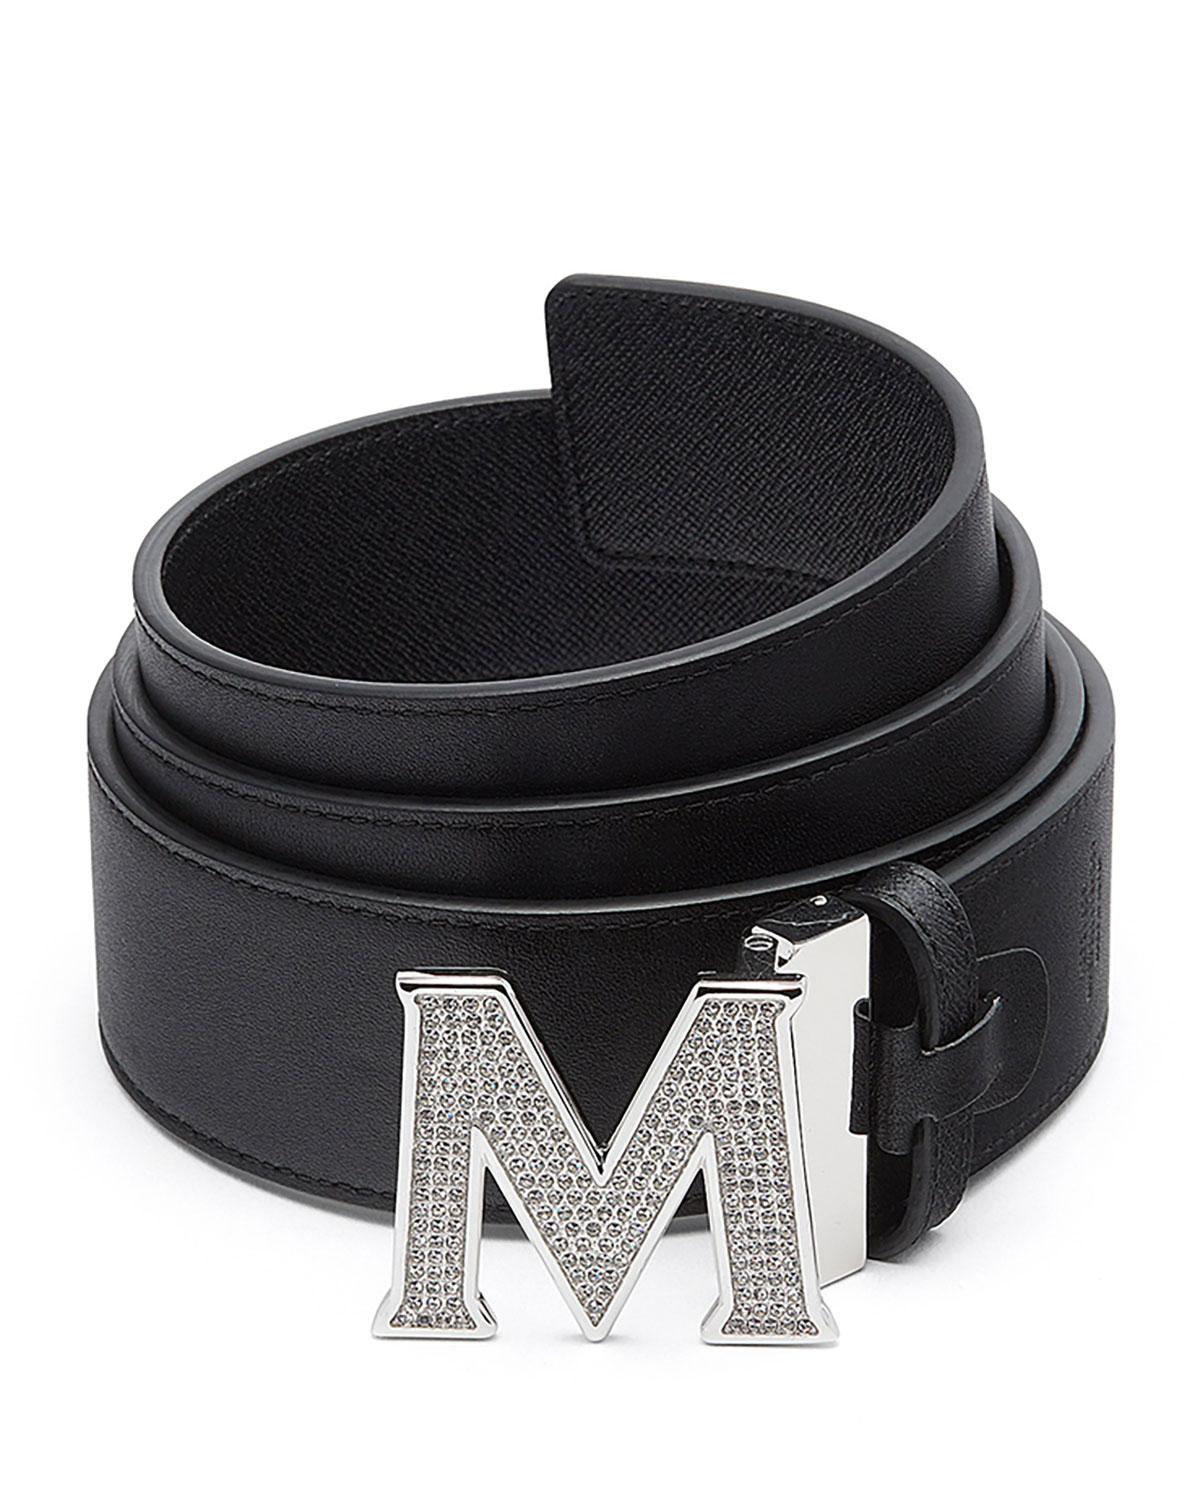 MCM Men's Be Jeweled M-buckle Leather Belt in Black/Silver (Black) for